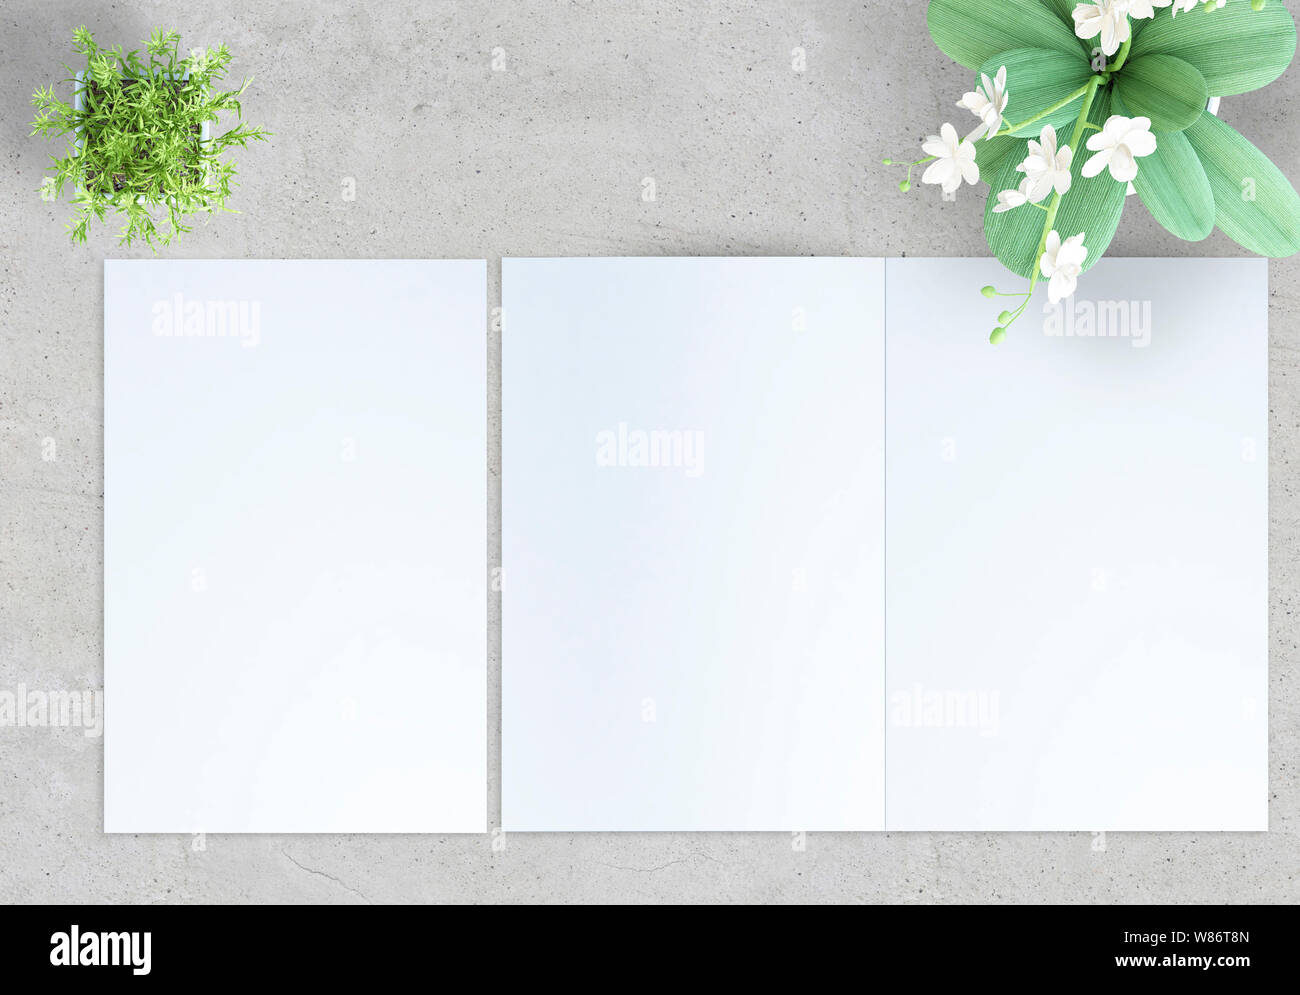 top view of Top view of a concrete surface with a open and closed bifold brochure and plants. 3d rendering mockup Stock Photo